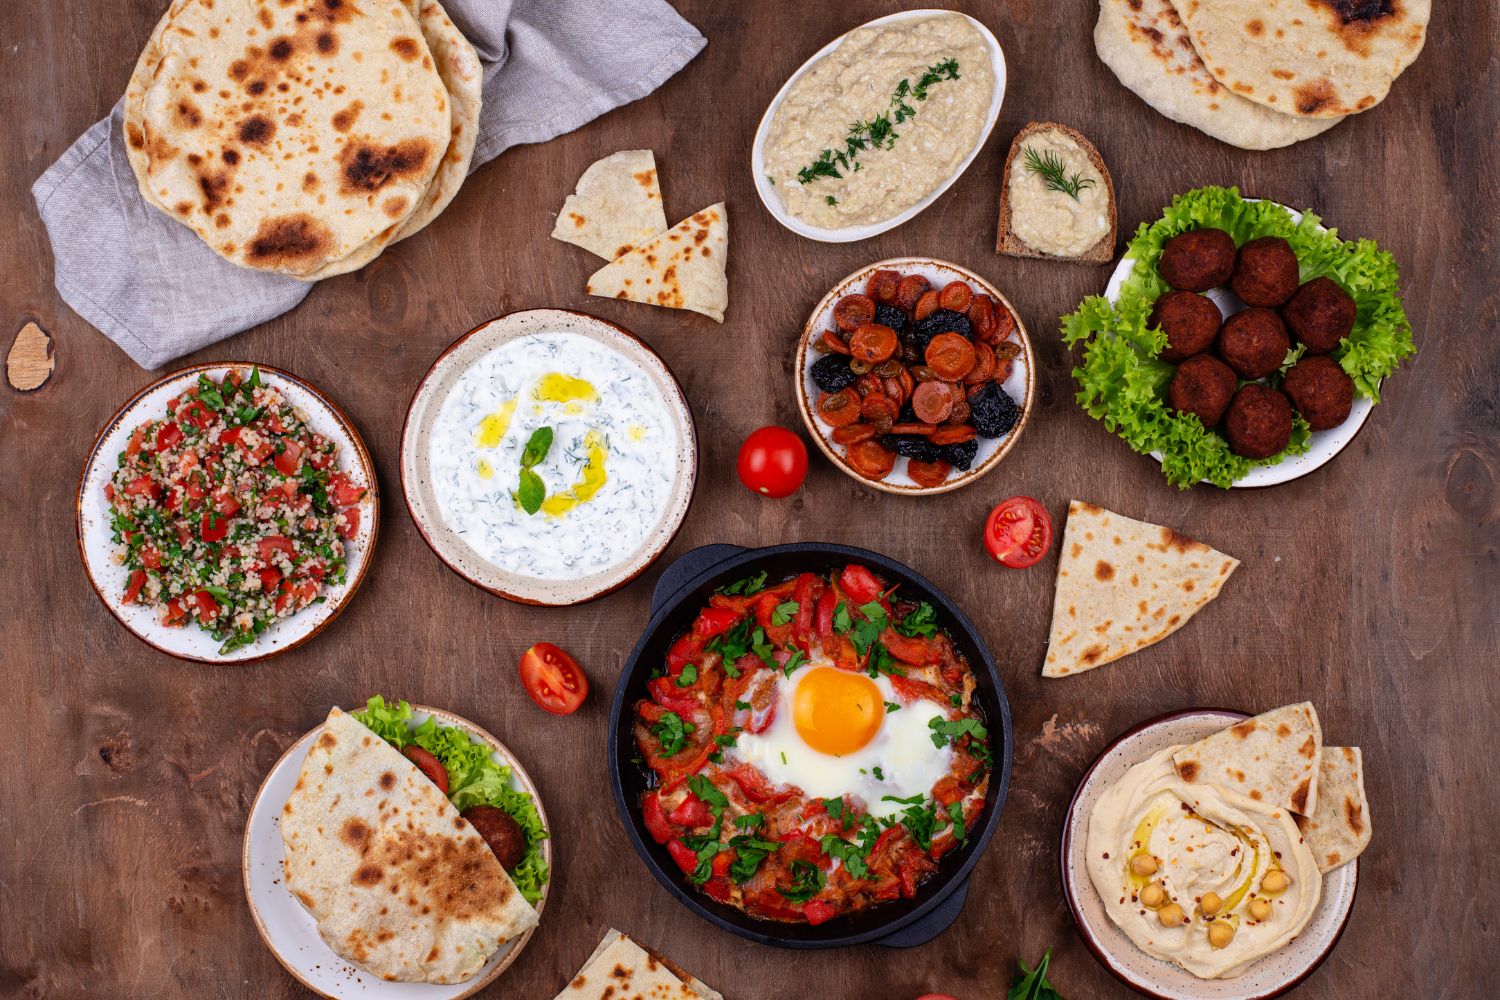 Jordan Culture and Traditions » All you need to know Food from Jordan